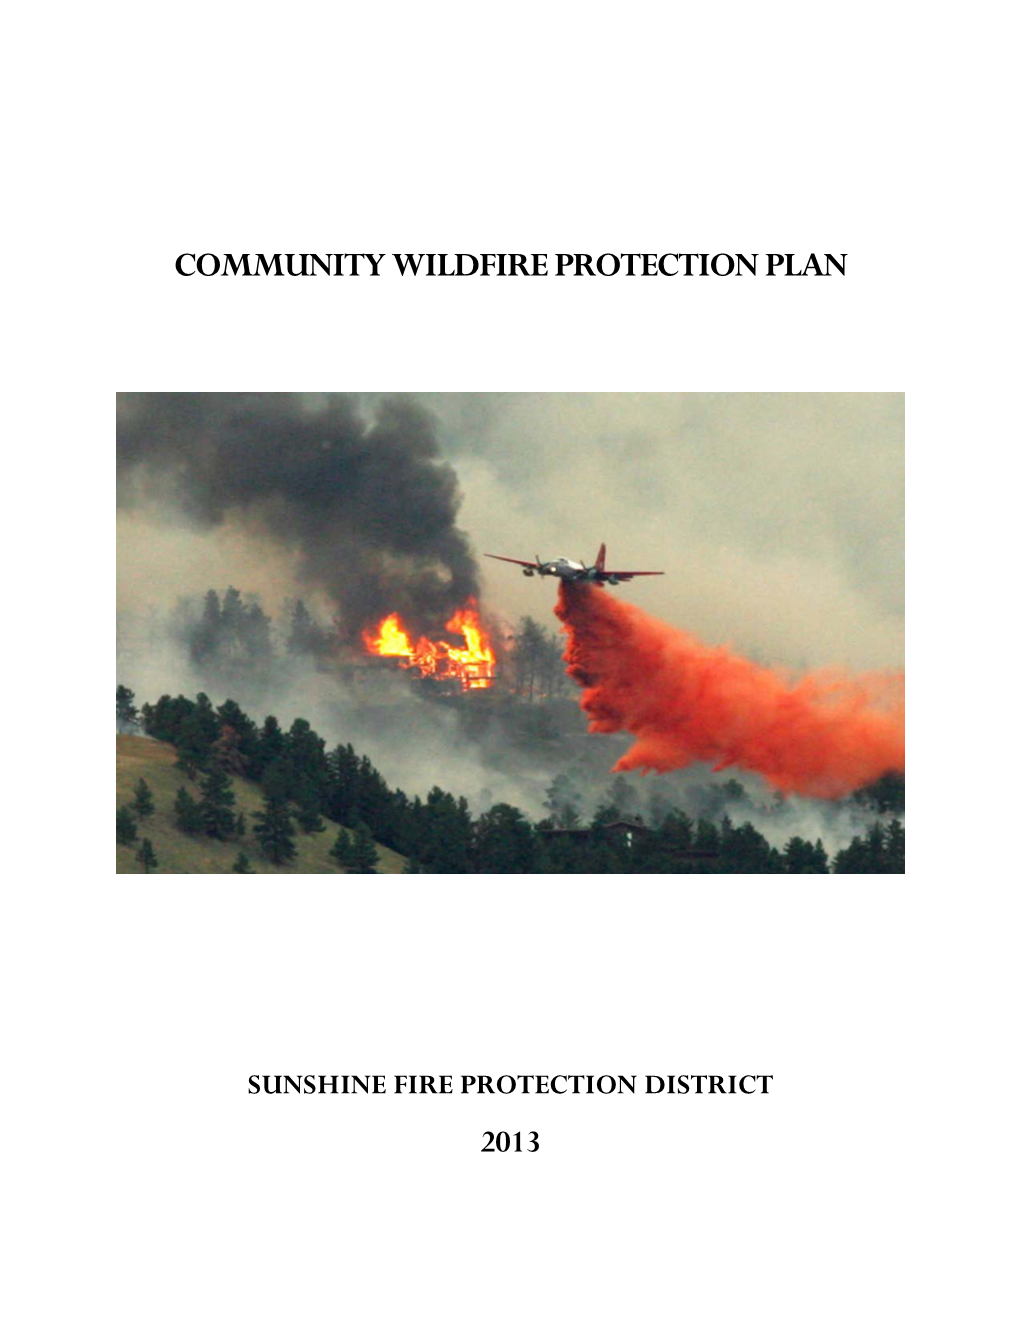 Sunshine Fire Protection District CWPP (2013)